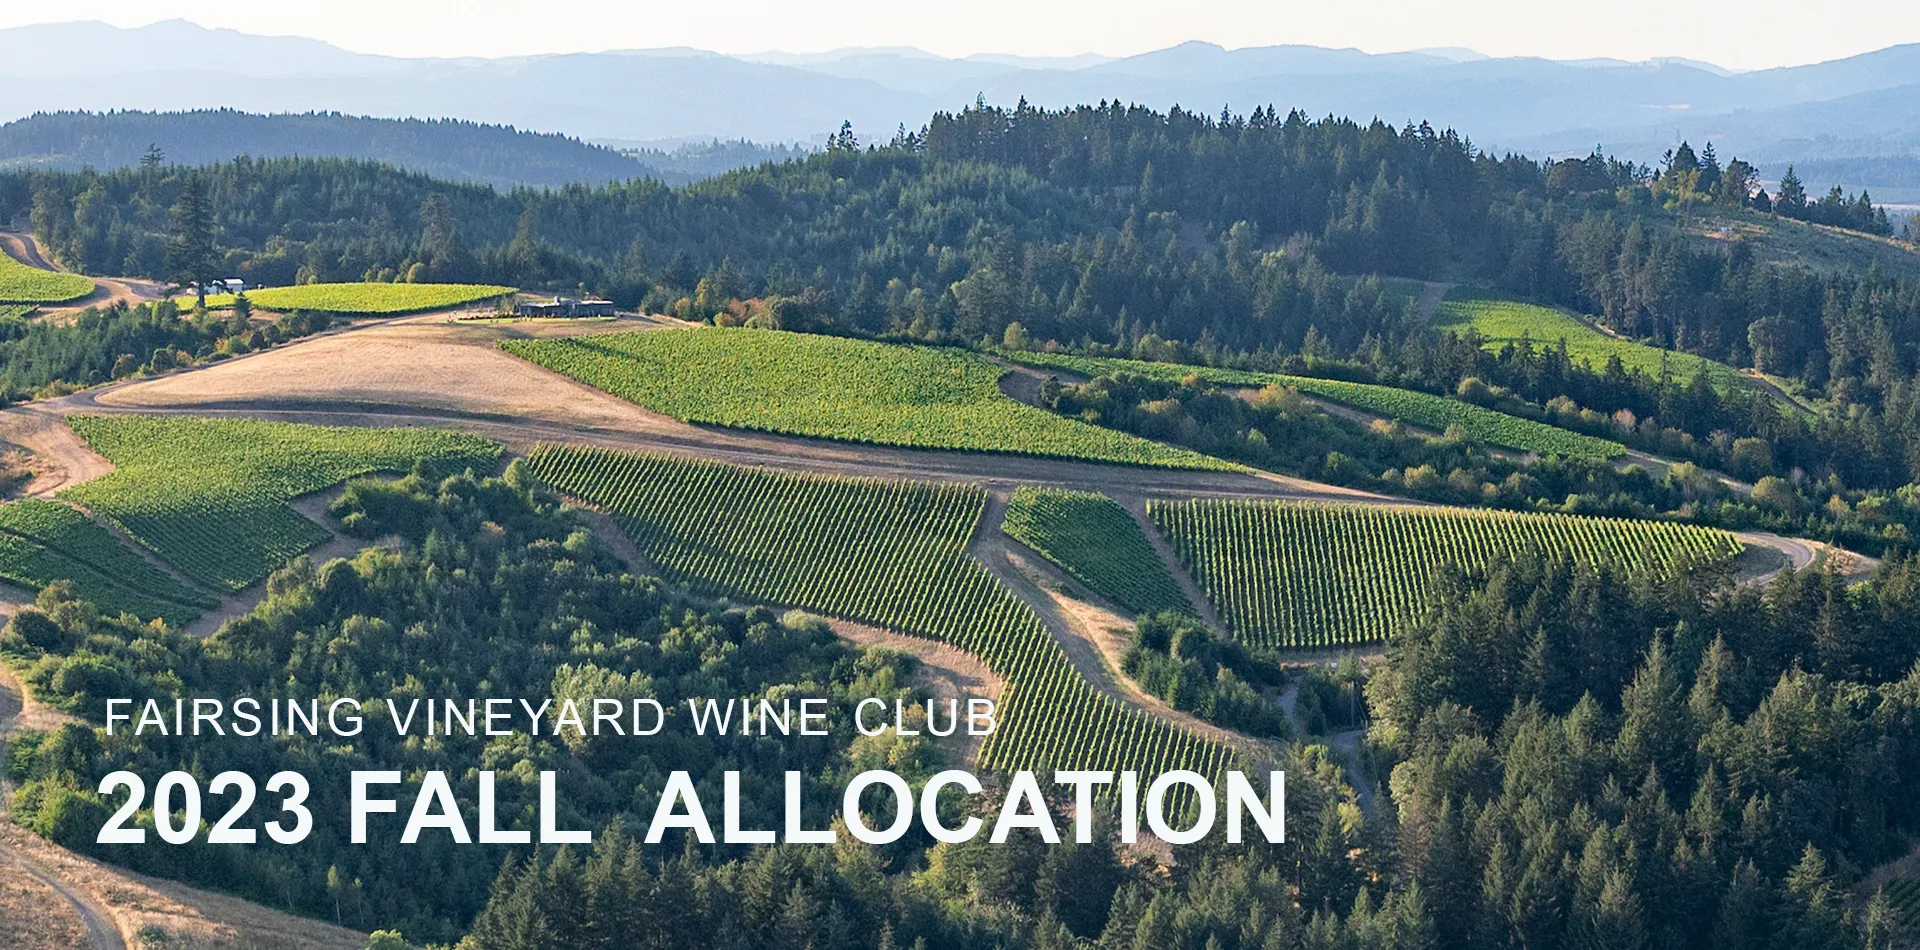 An aerial view of vine blocks on the east side of Fairsing Vineyard in Oregon's Willamette Valley with 2023 Wine Club Allocation details